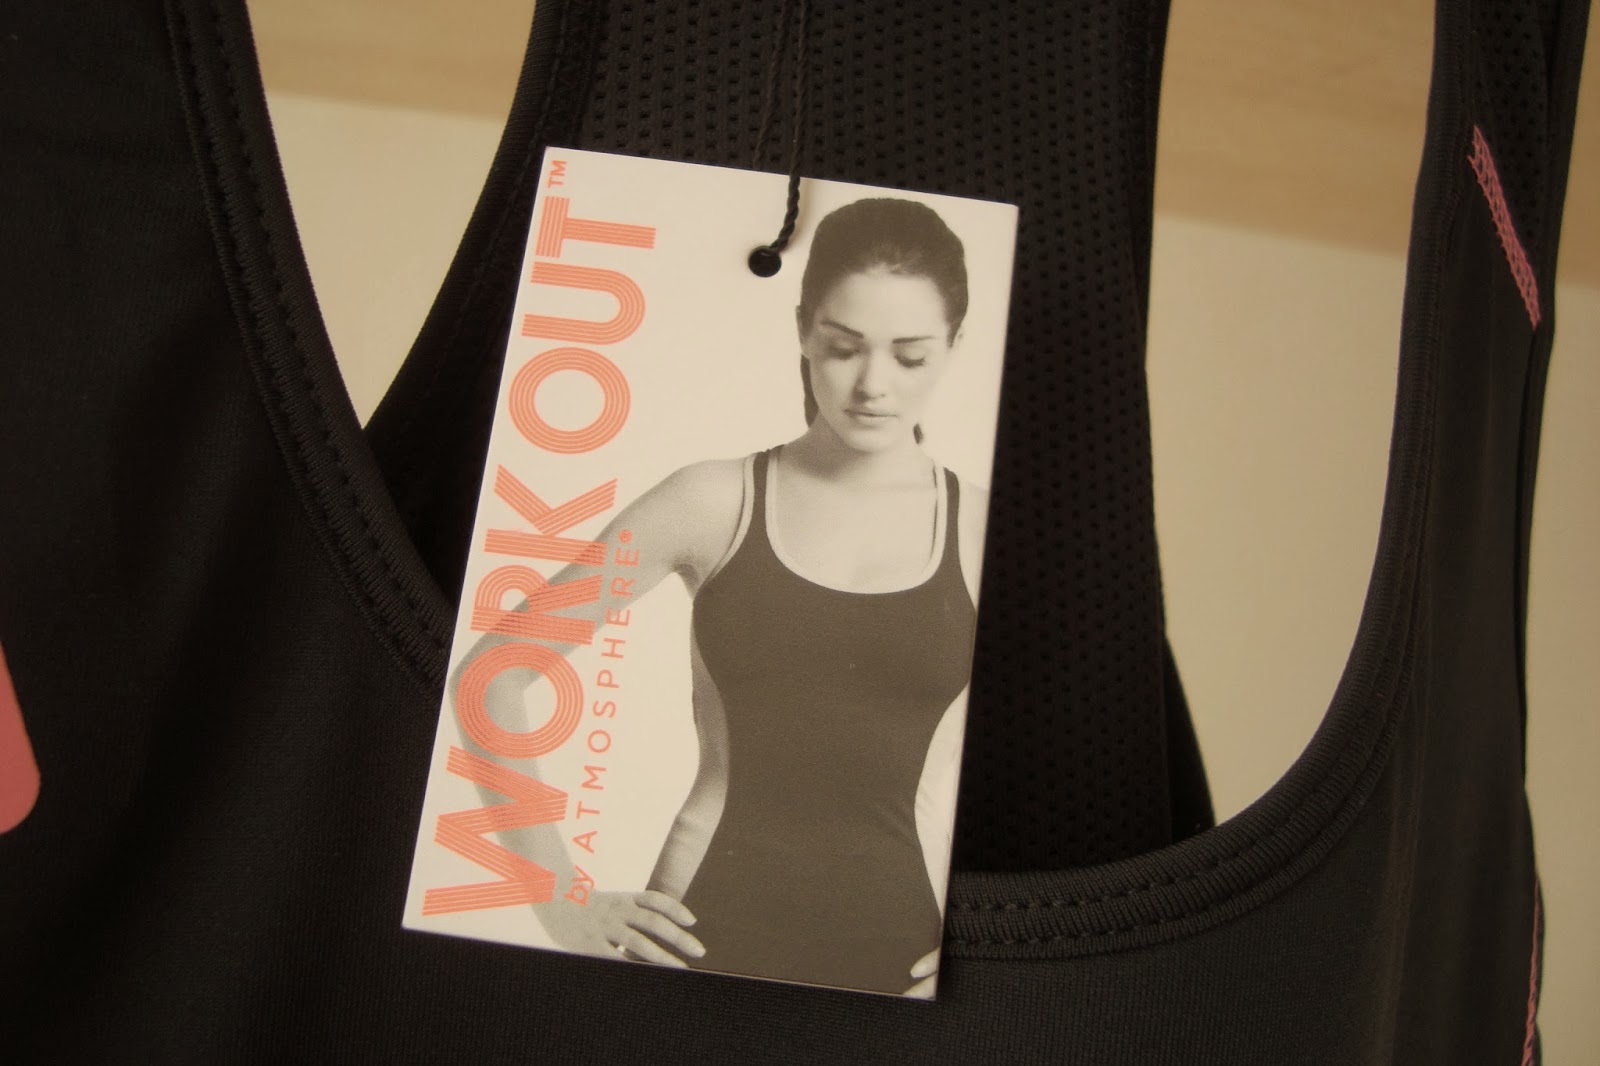 6 Day Workout Brand Primark for Weight Loss